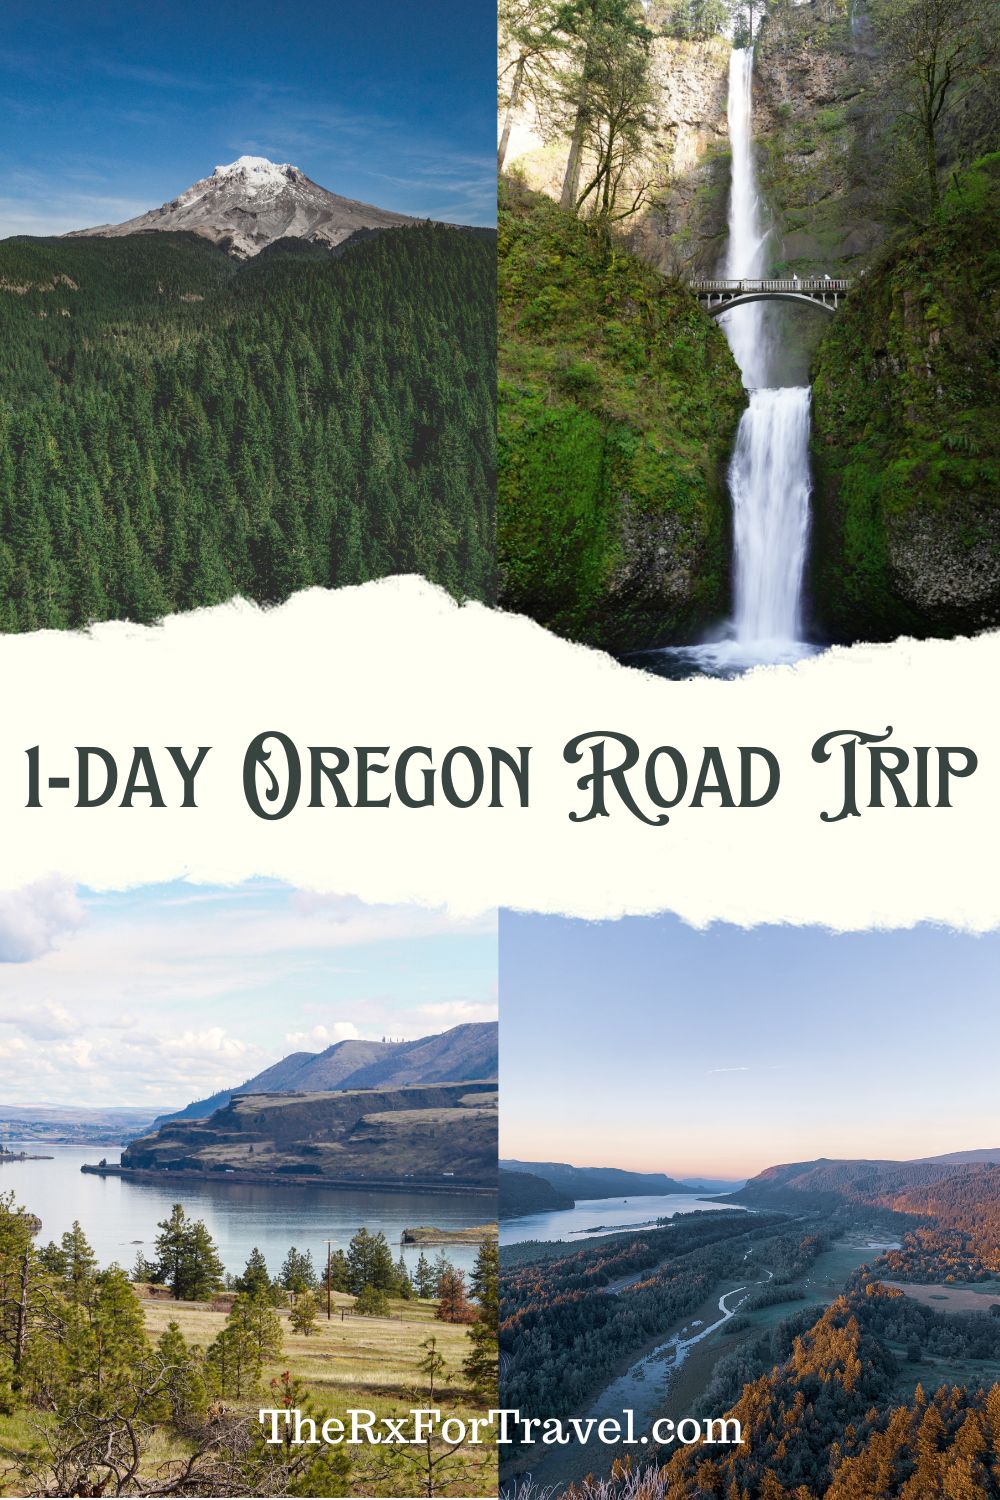 In 1 day, you’ll adventure on an Oregon Road Trip from Portland to see scenic sights like Mount Hood, Colombia River Gorge, and Multnomah Falls.